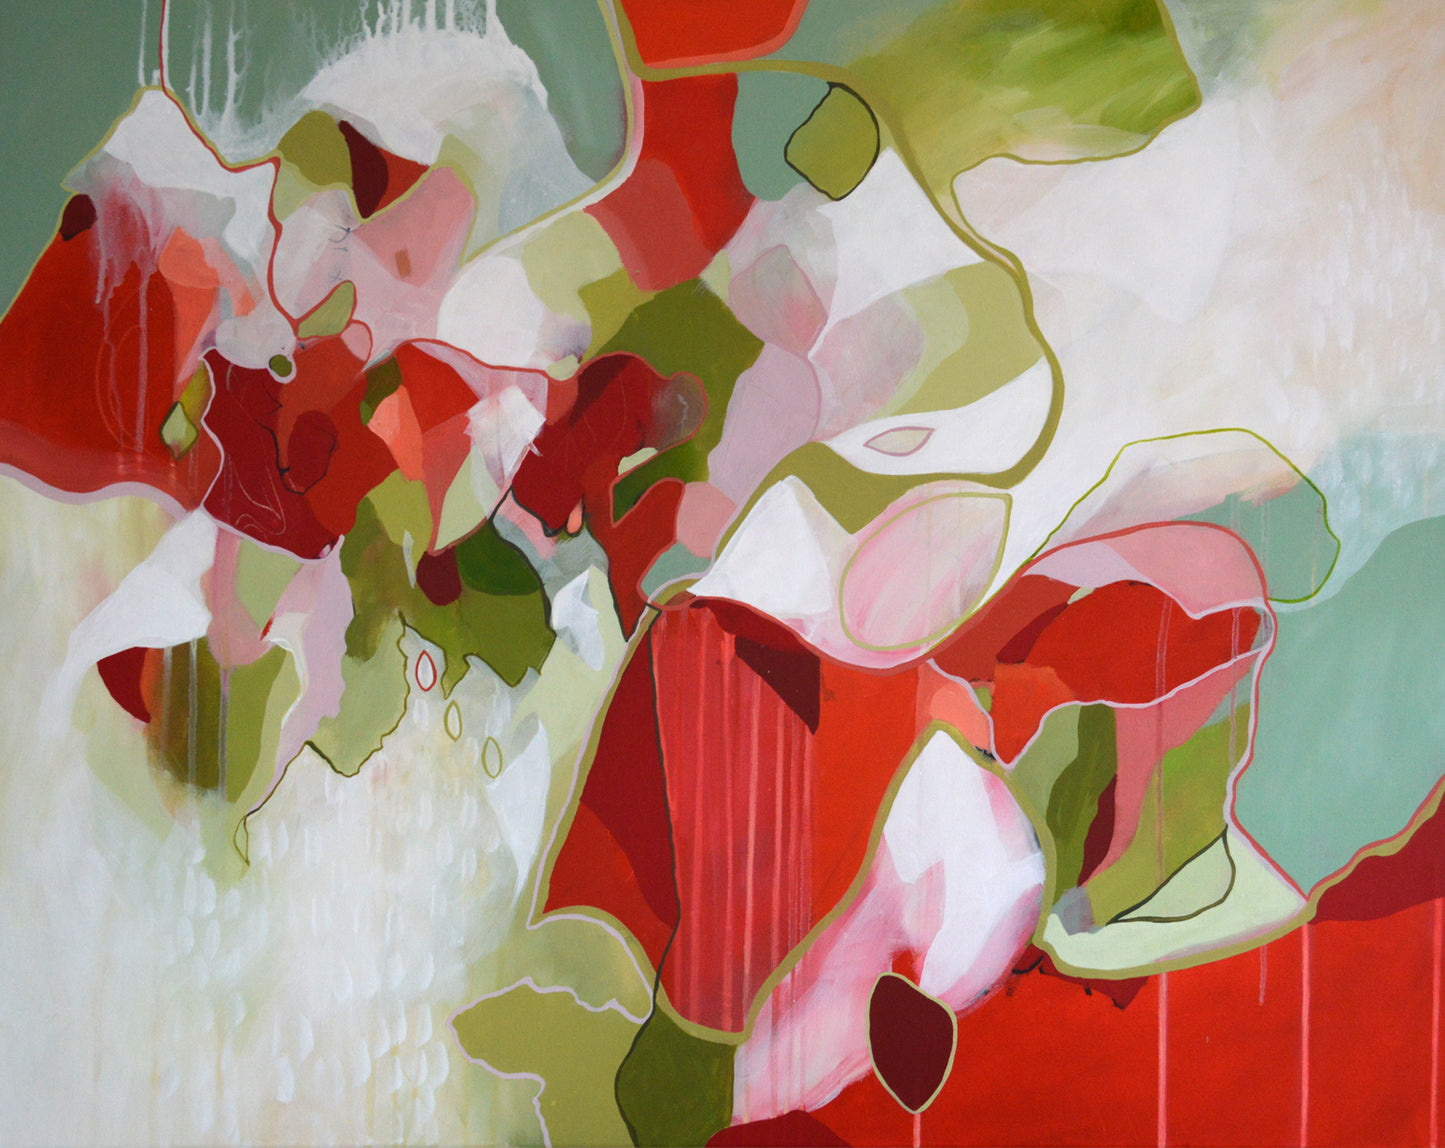 Inverse Reality - Large Red And Green Original Abstract Painting